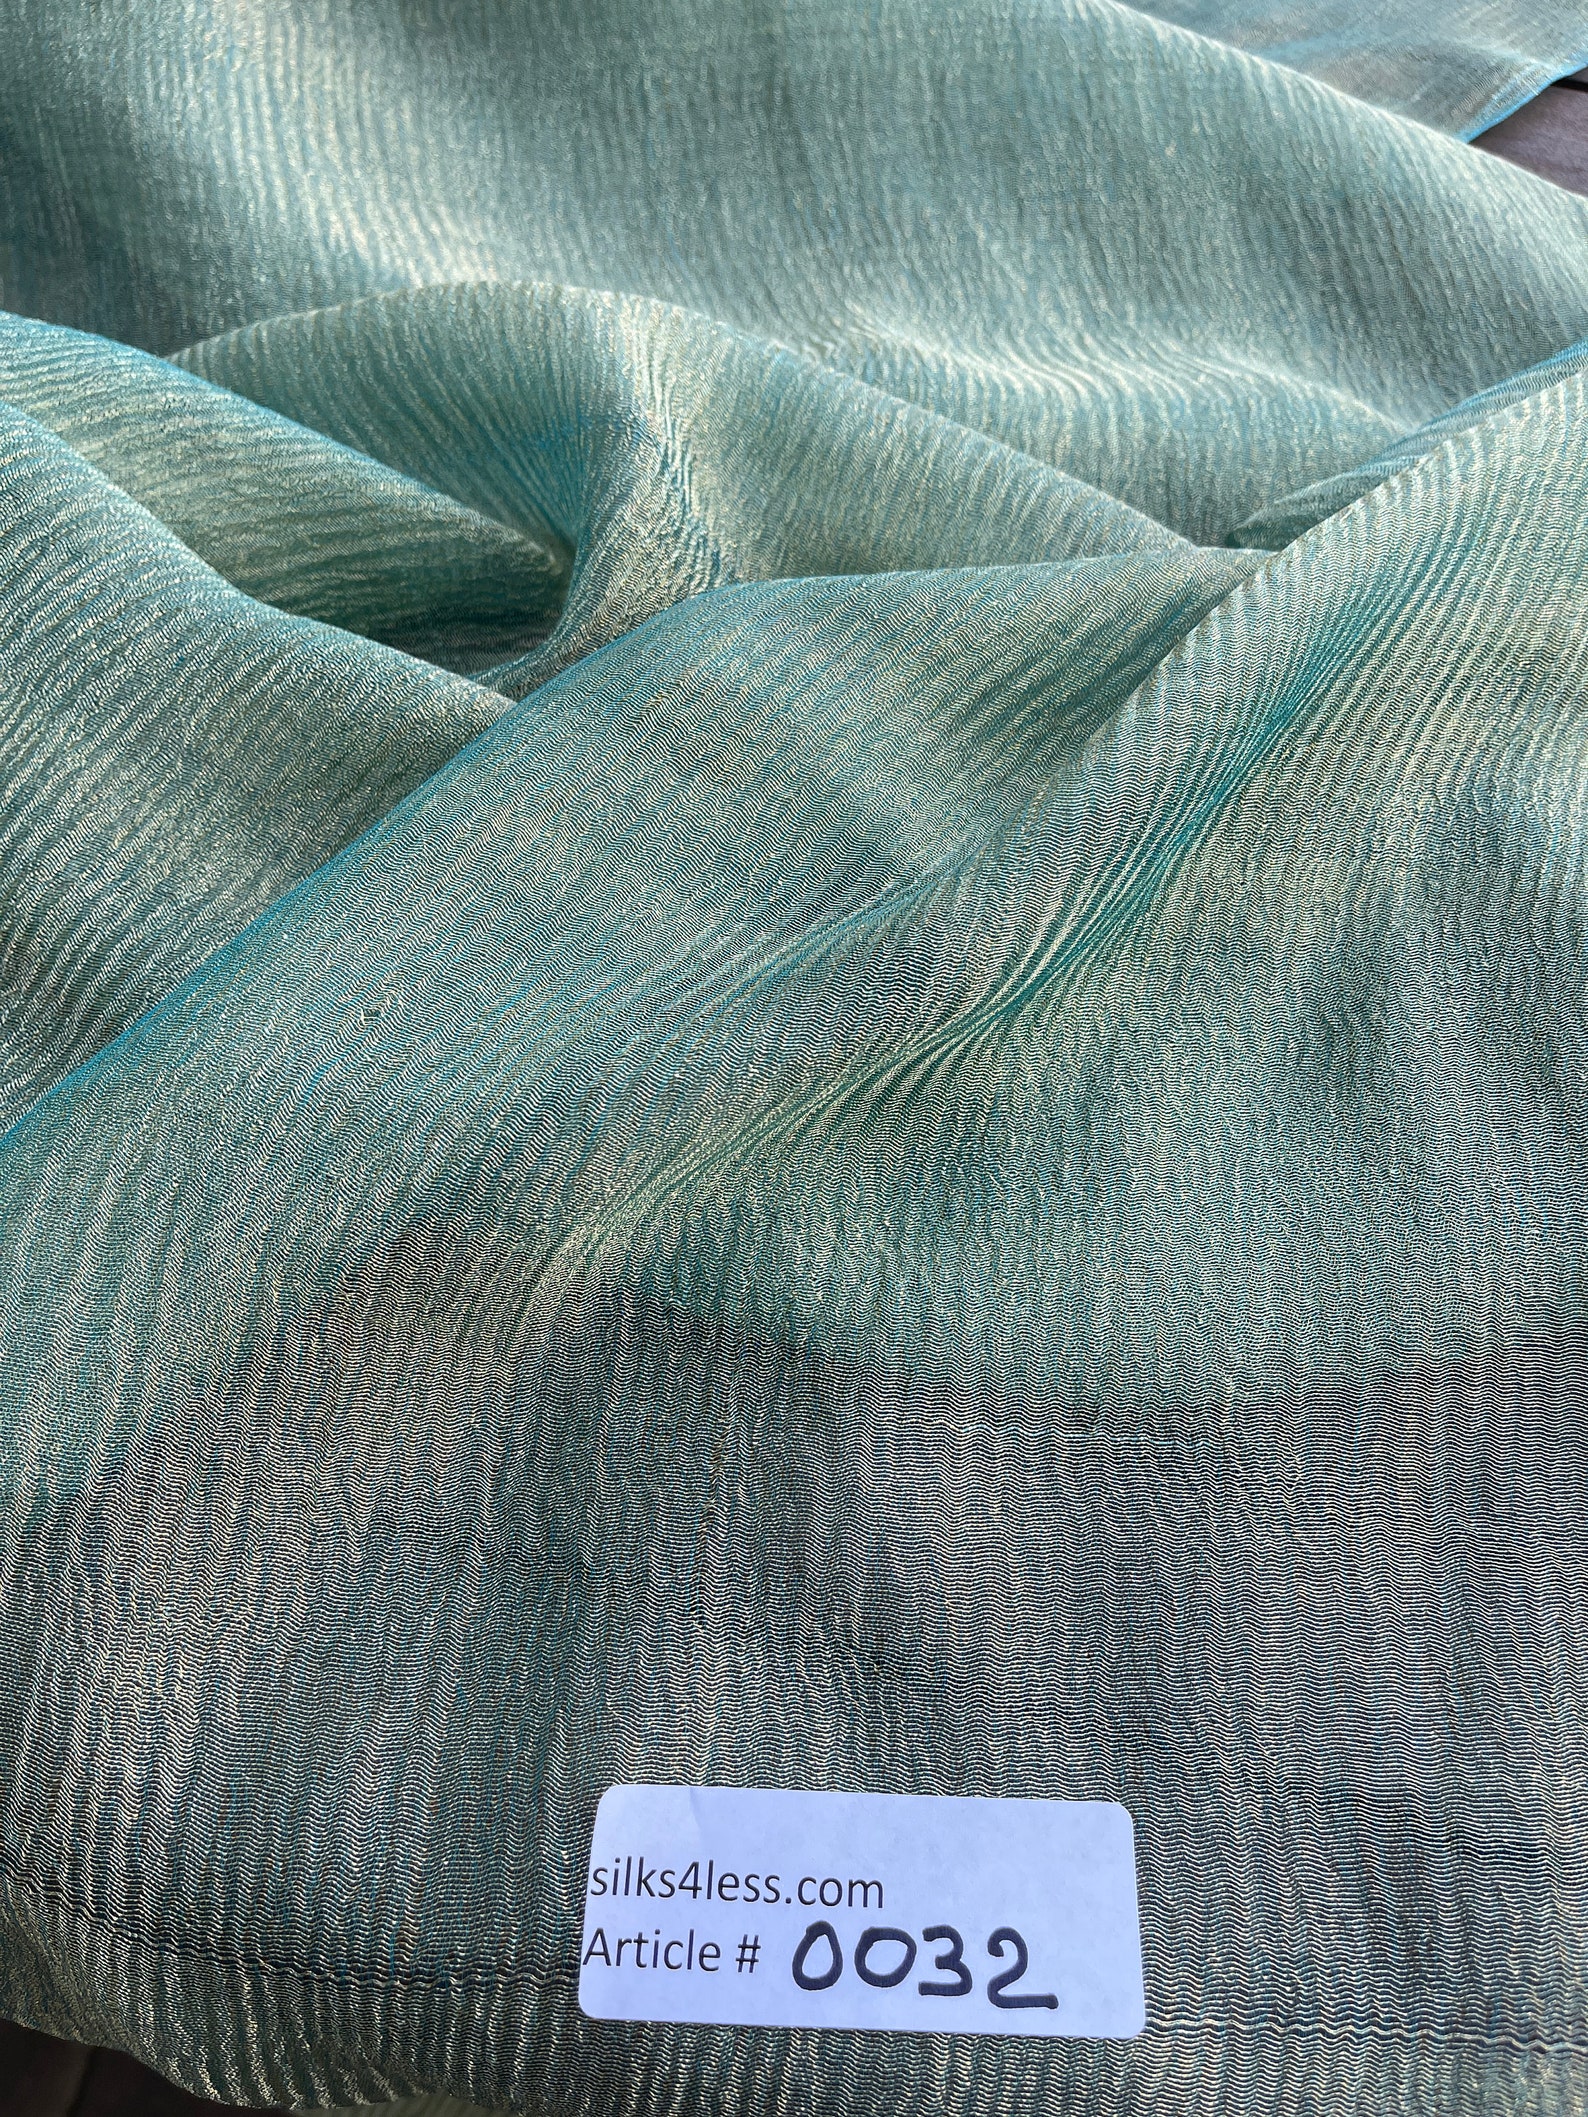 Exquisite Quality Silk Tissue Pleated / Crushed TURQUOISE/ - Etsy